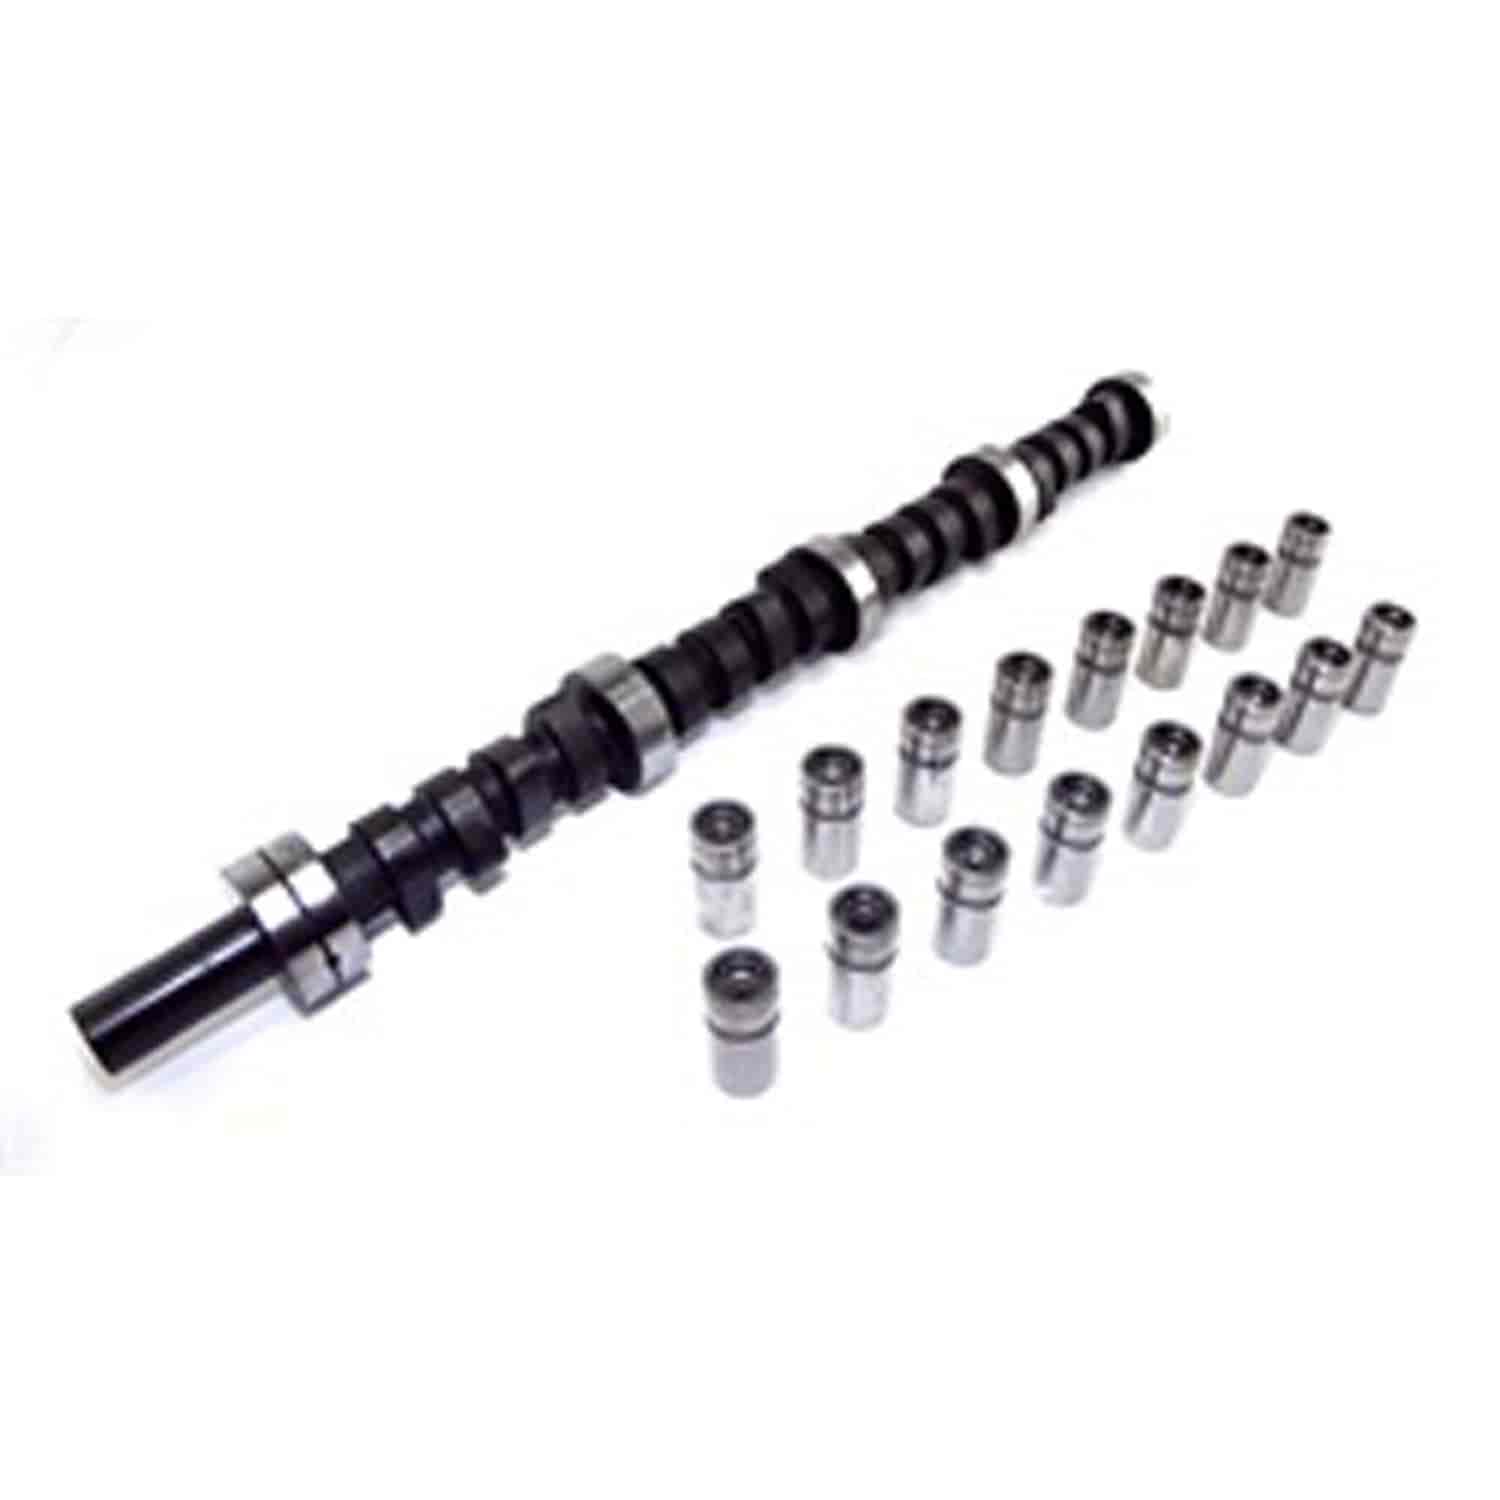 Camshaft Kit 5.0L 5.9L and 6.6L Includes Camshaft Lube and Lifters 1972-1991 Models